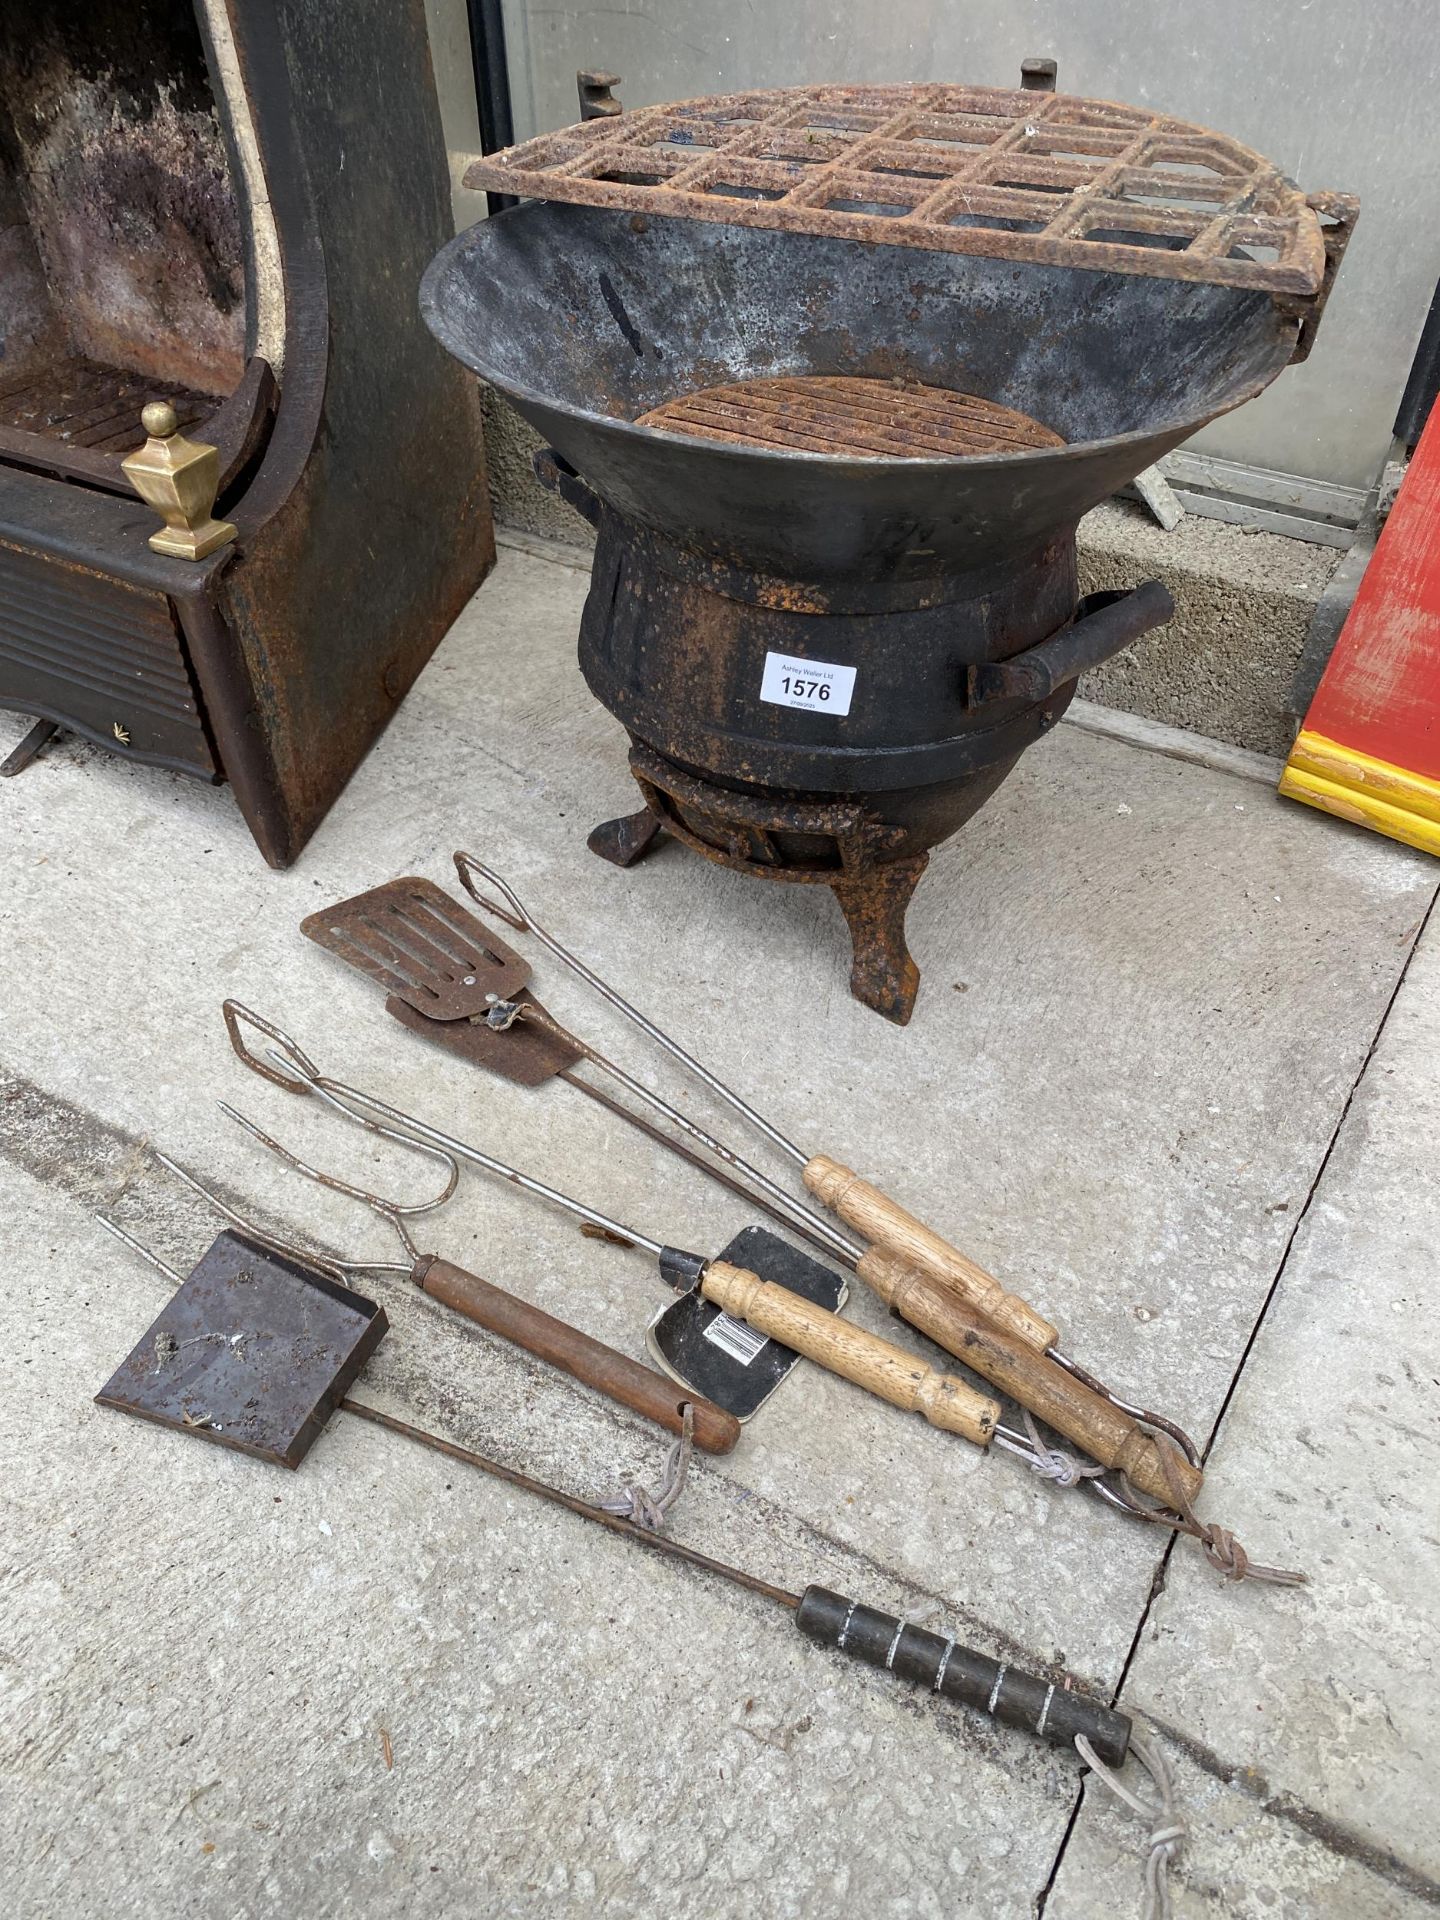 A VINTAGE CAST IRON FIRE PIT WITH AN ASSORTMENT OF GRILLING TOOLS